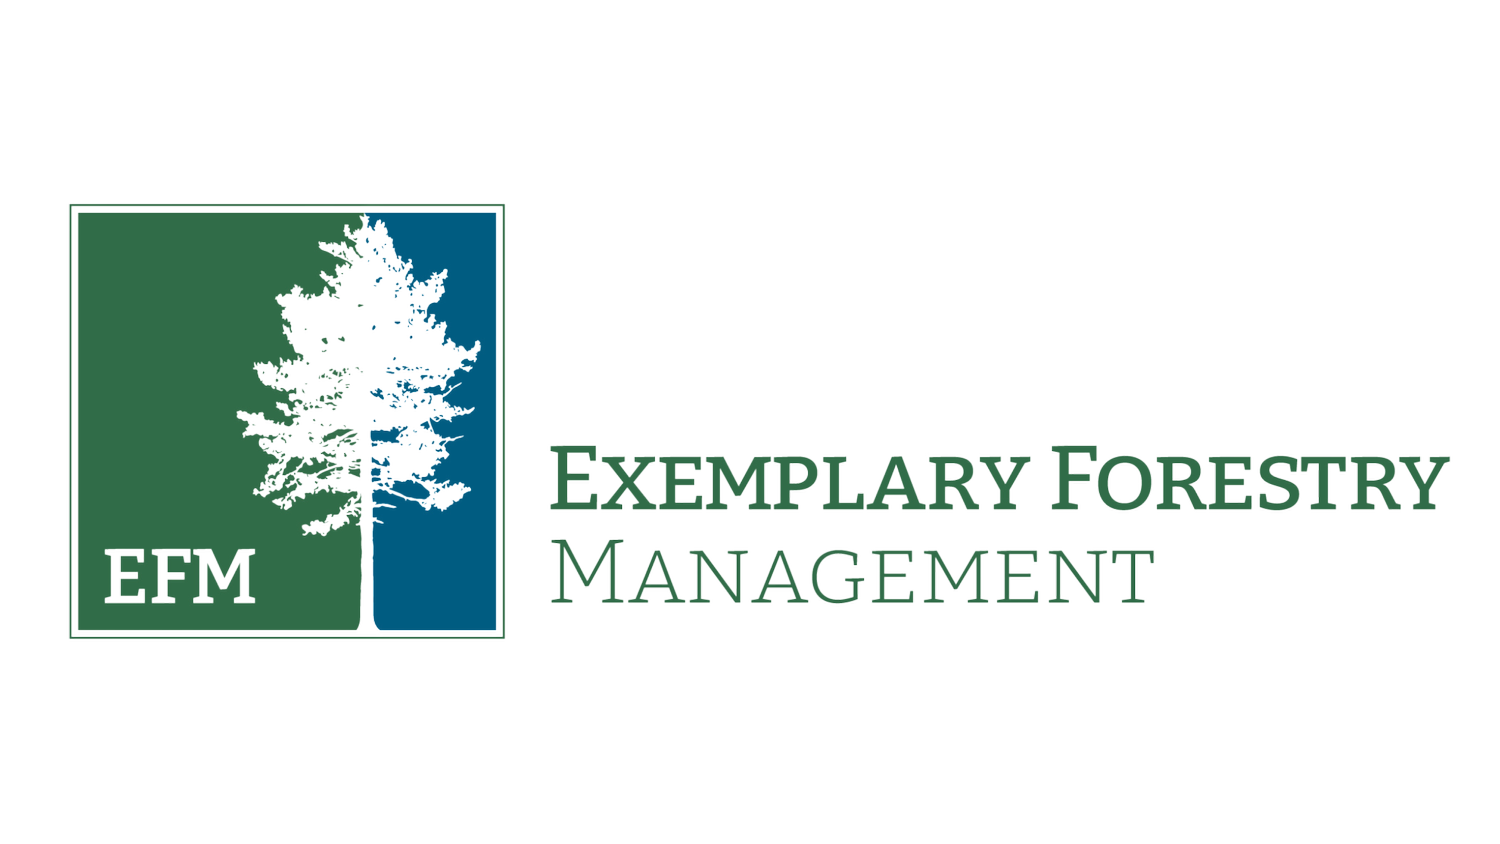 Exemplary Forestry Management